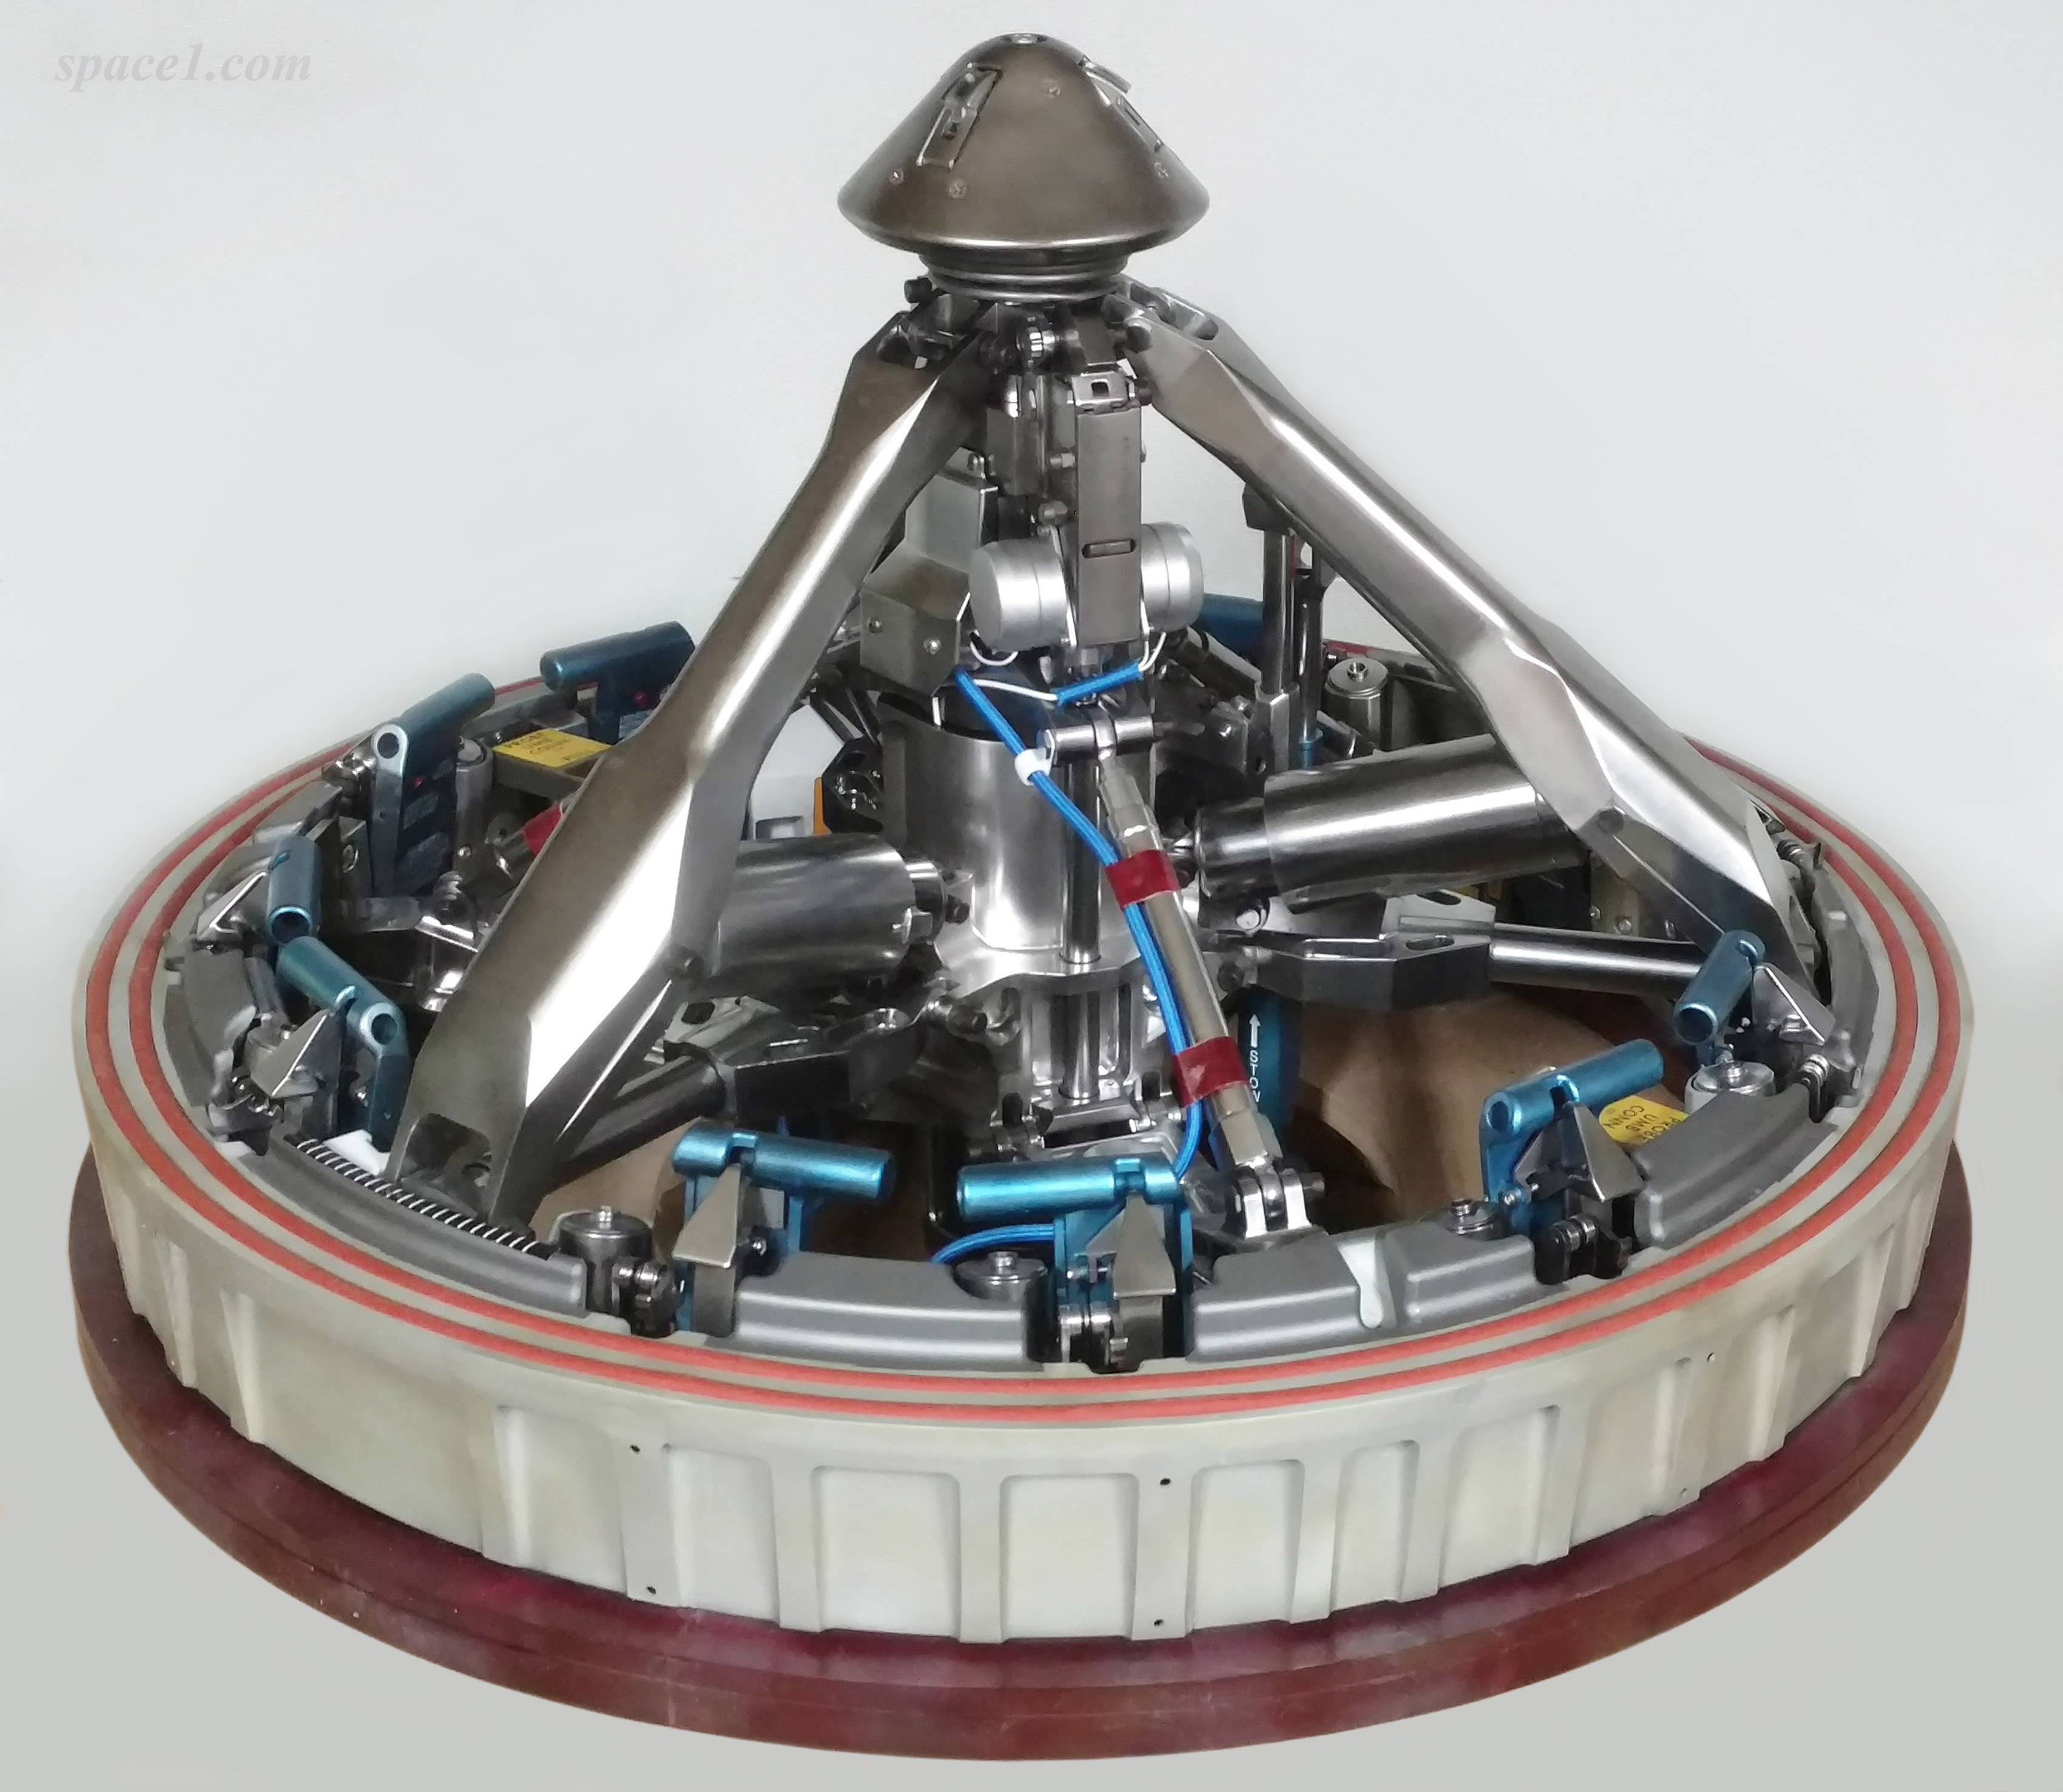 Apollo_docking_ring_and_docking_probe_model_a